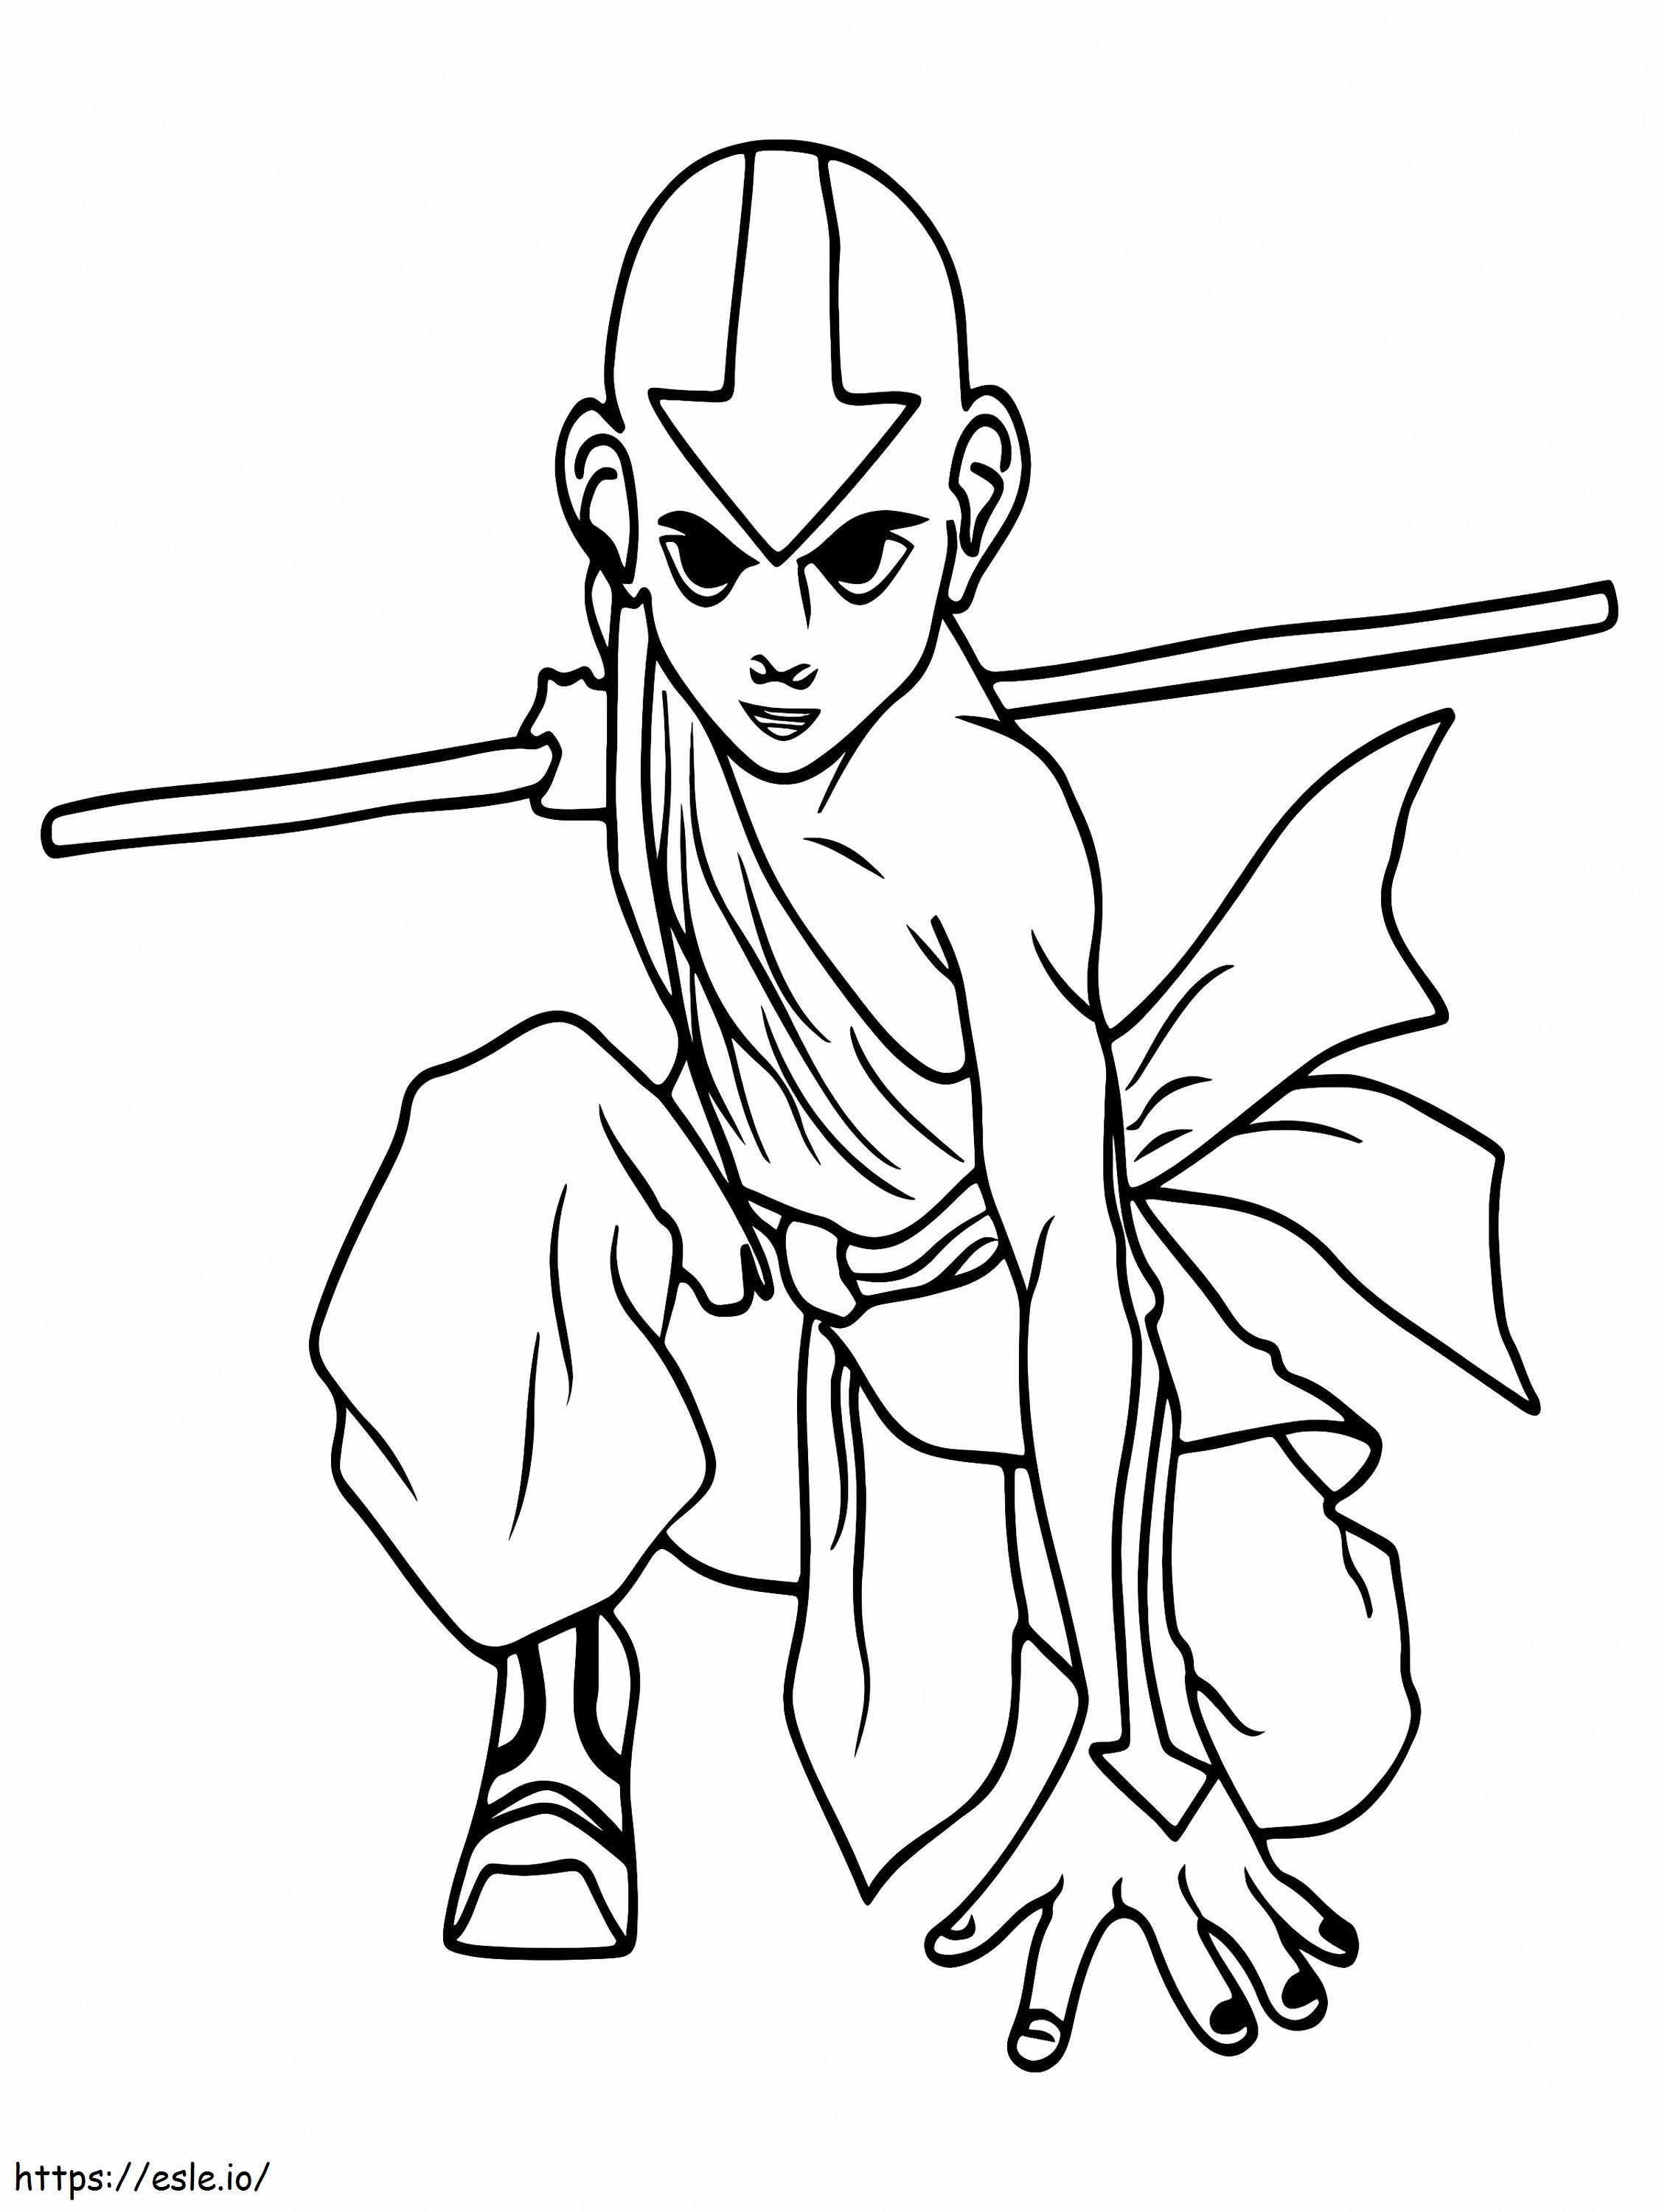 Aang Fighting The Legend Of Korra coloring page